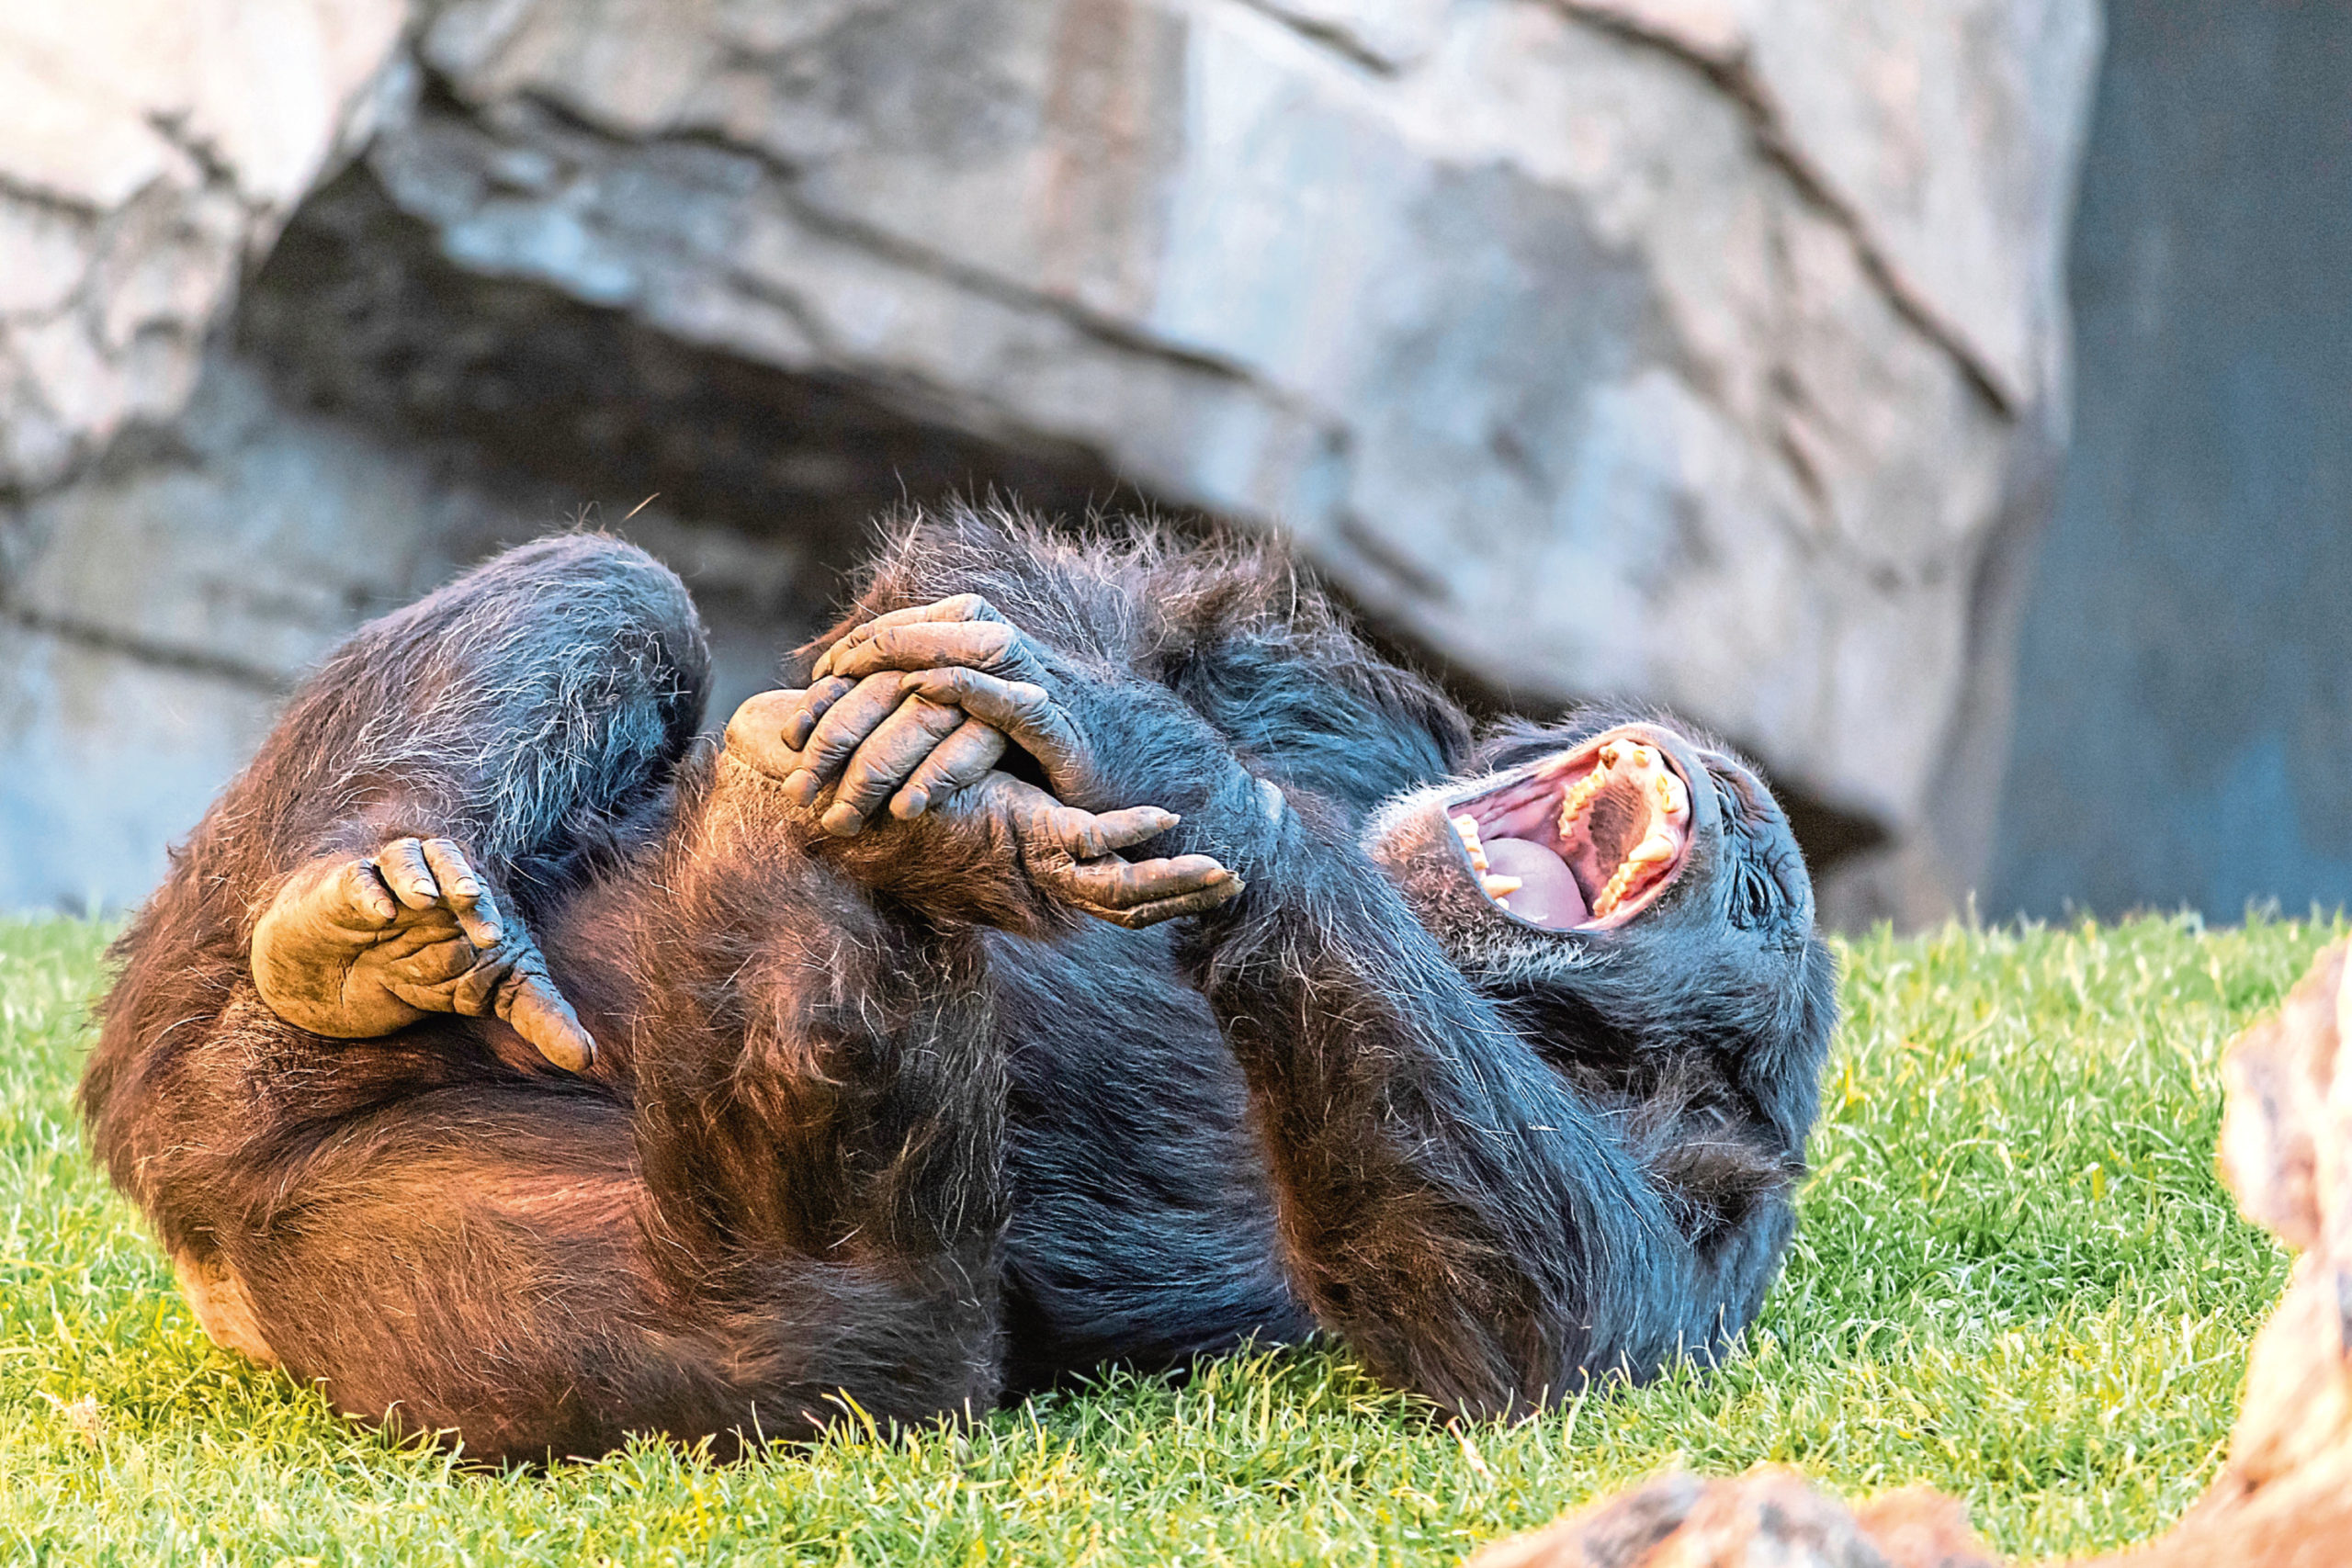 This chimpanzee clearly knows the benefits of a good laugh